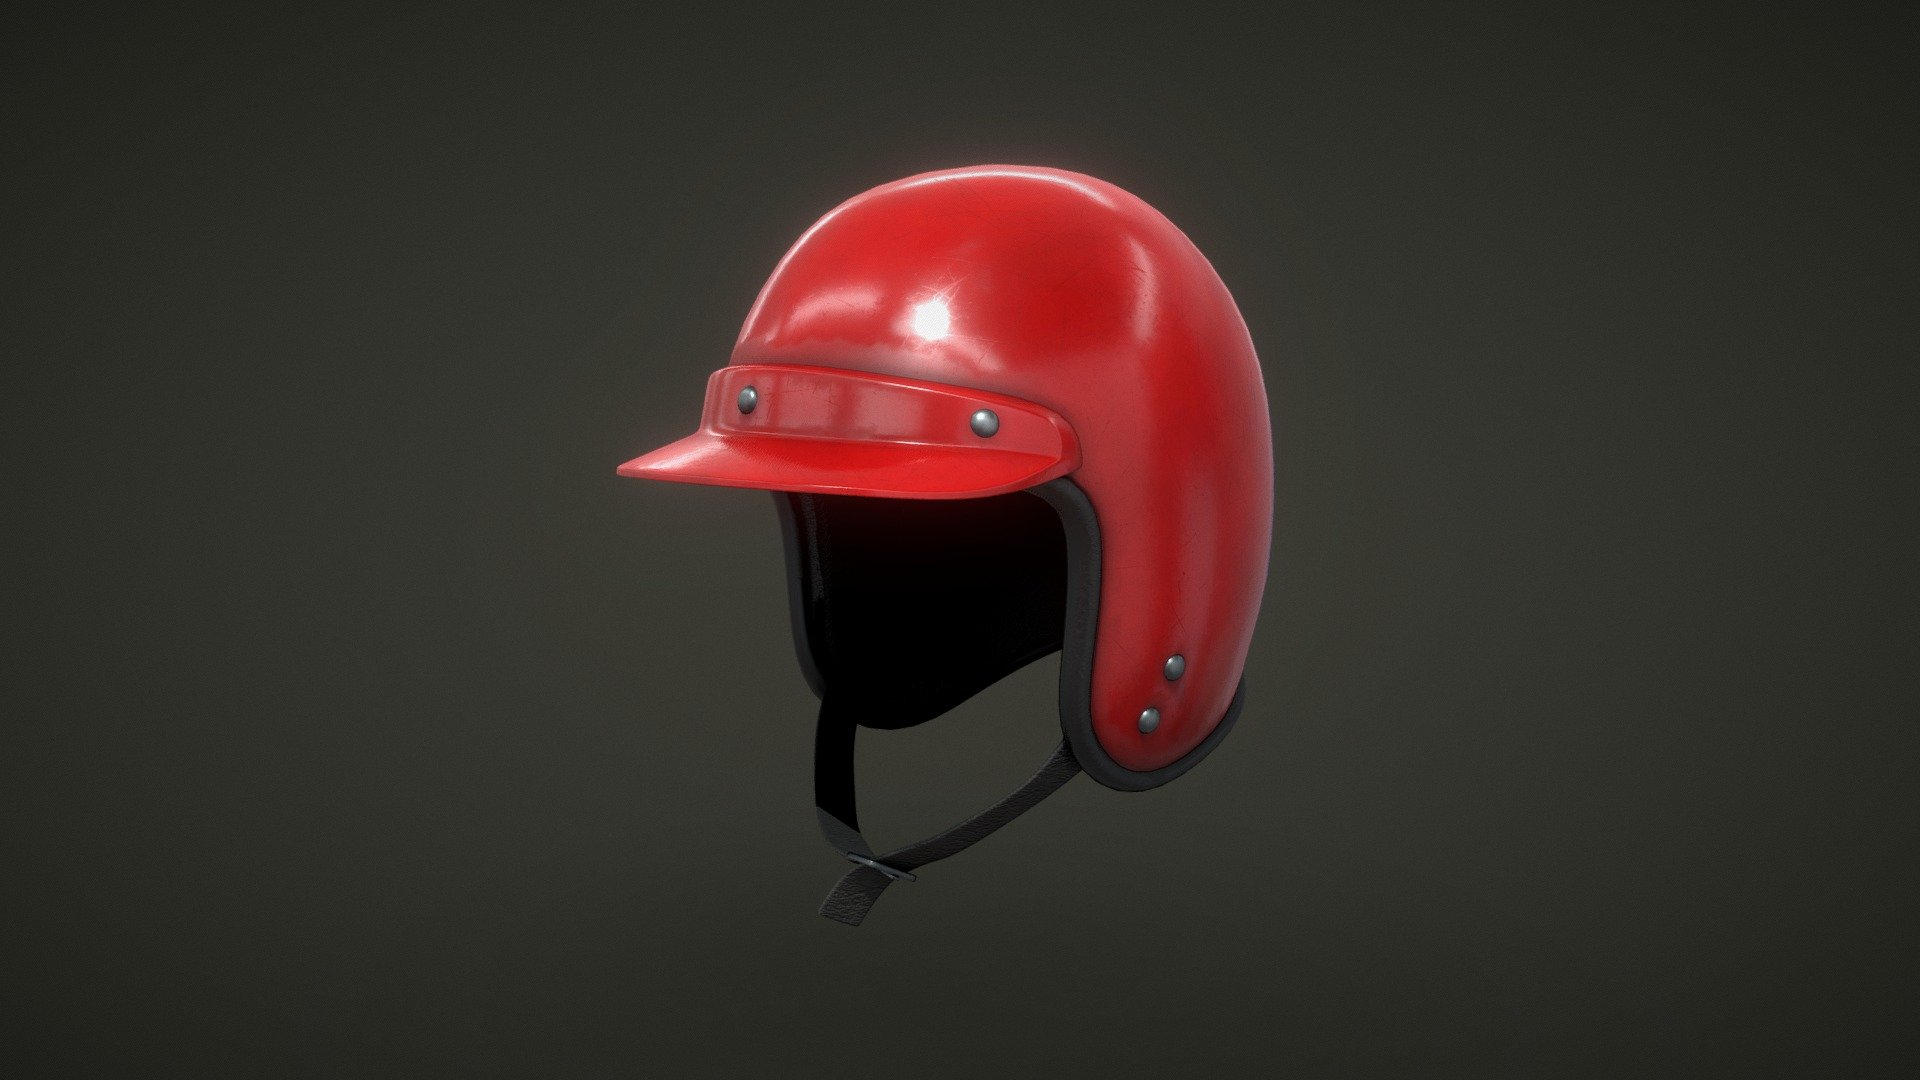 If you decide to puchase this model I've included a PSD of the helmet's UVs for creating custom designs 3d model